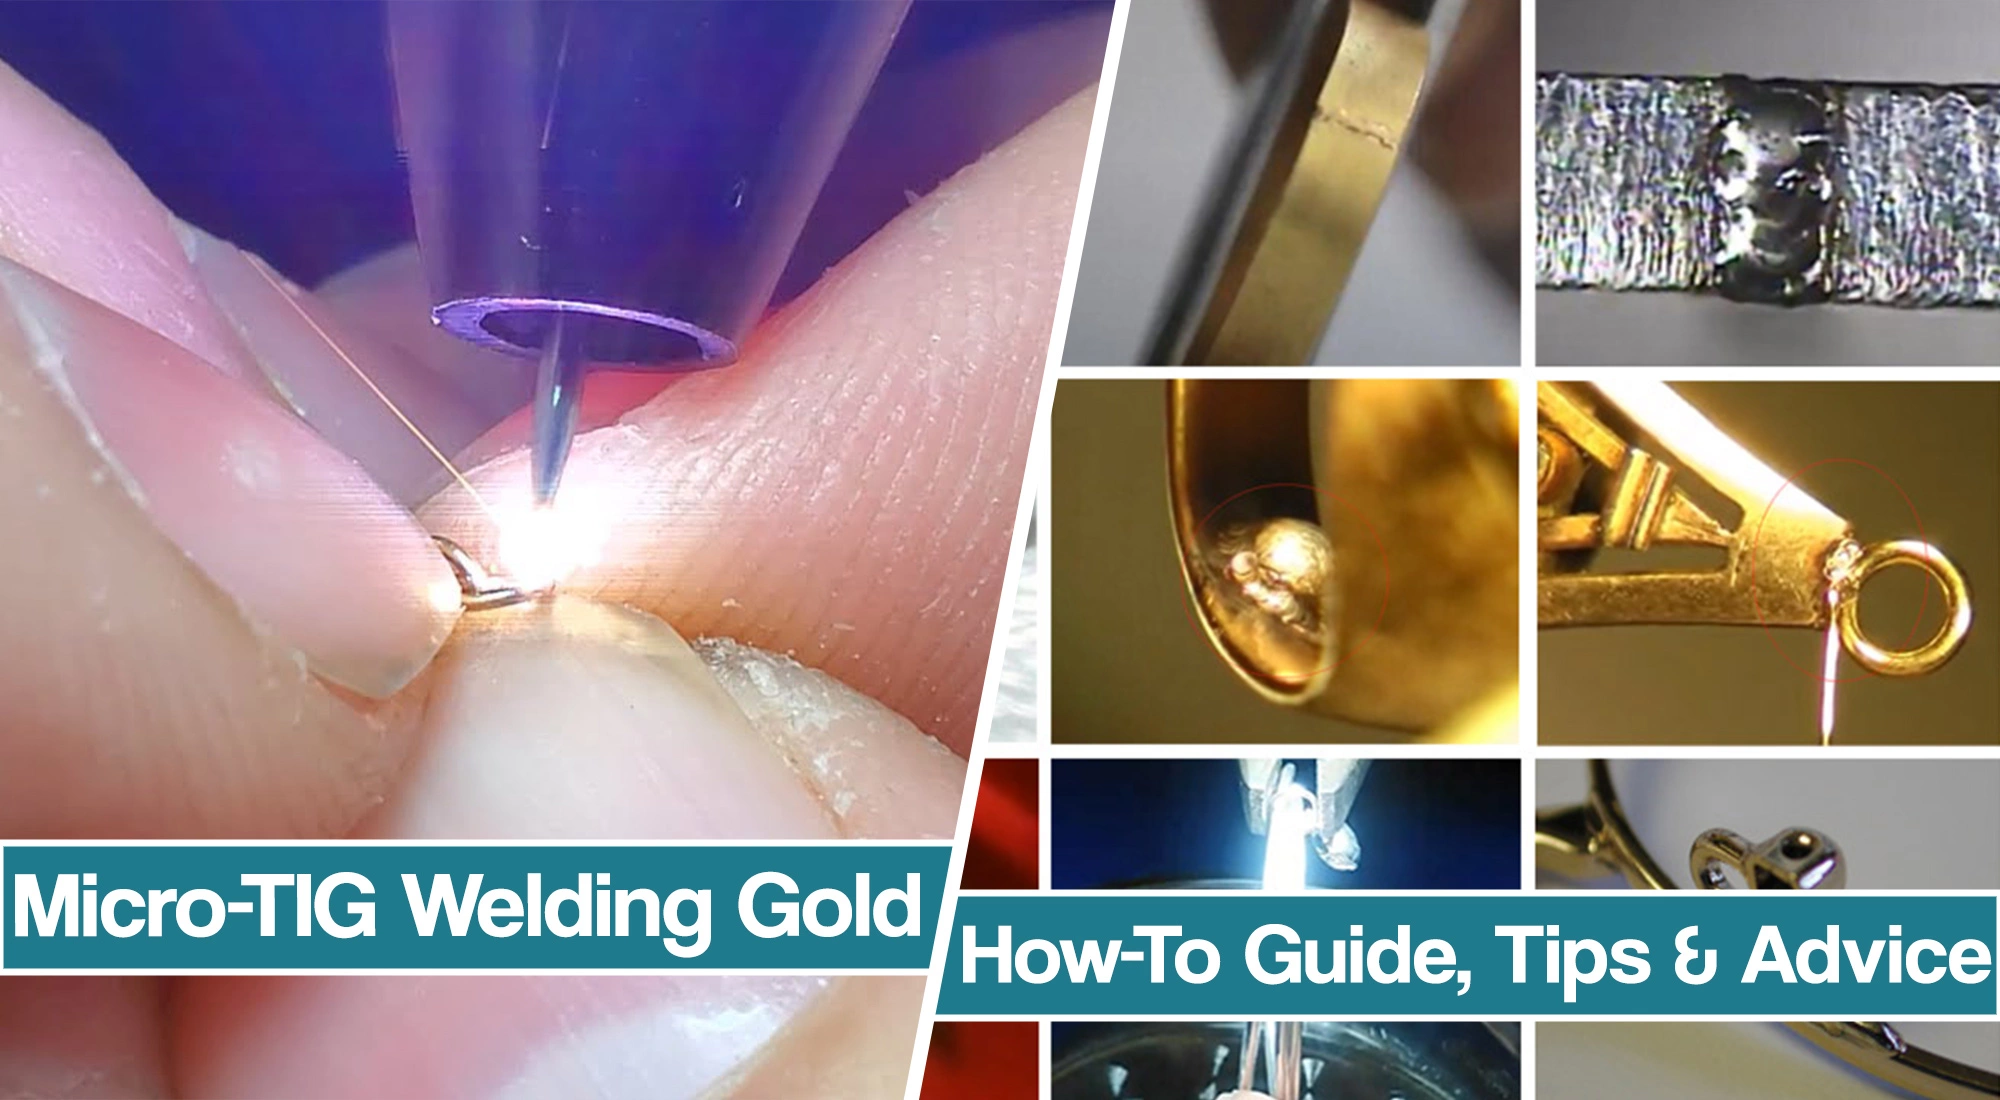 How To Micro-TIG Weld Gold – Tips For Successful Gold TIG Welds